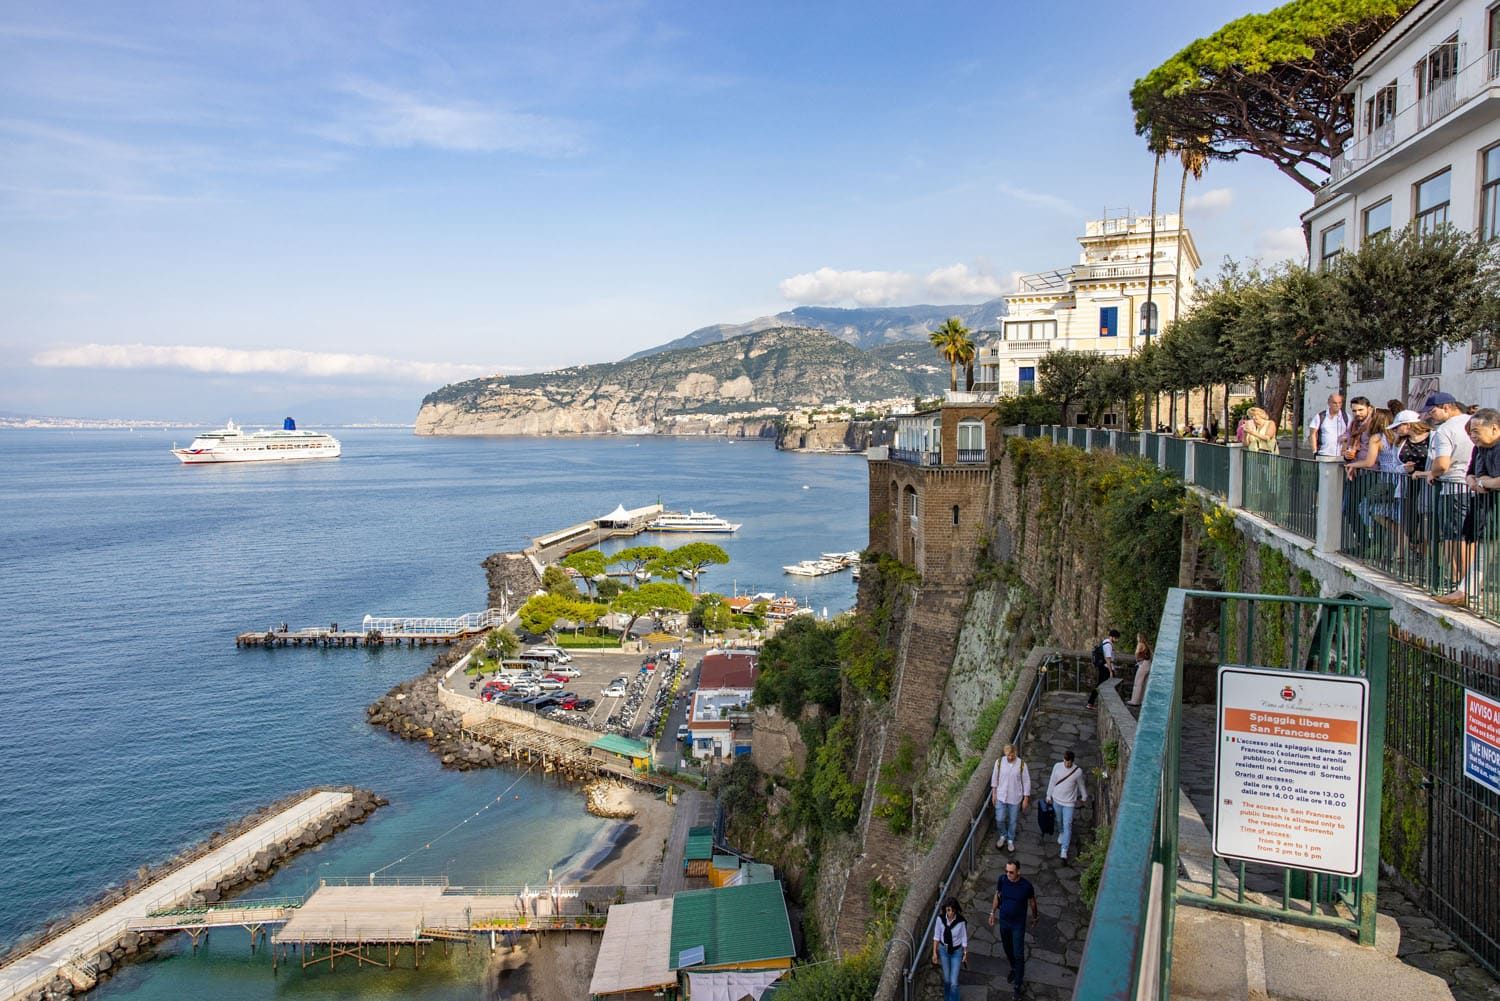 Villa Comunale di Sorrento | Best Things to Do in Sorrento